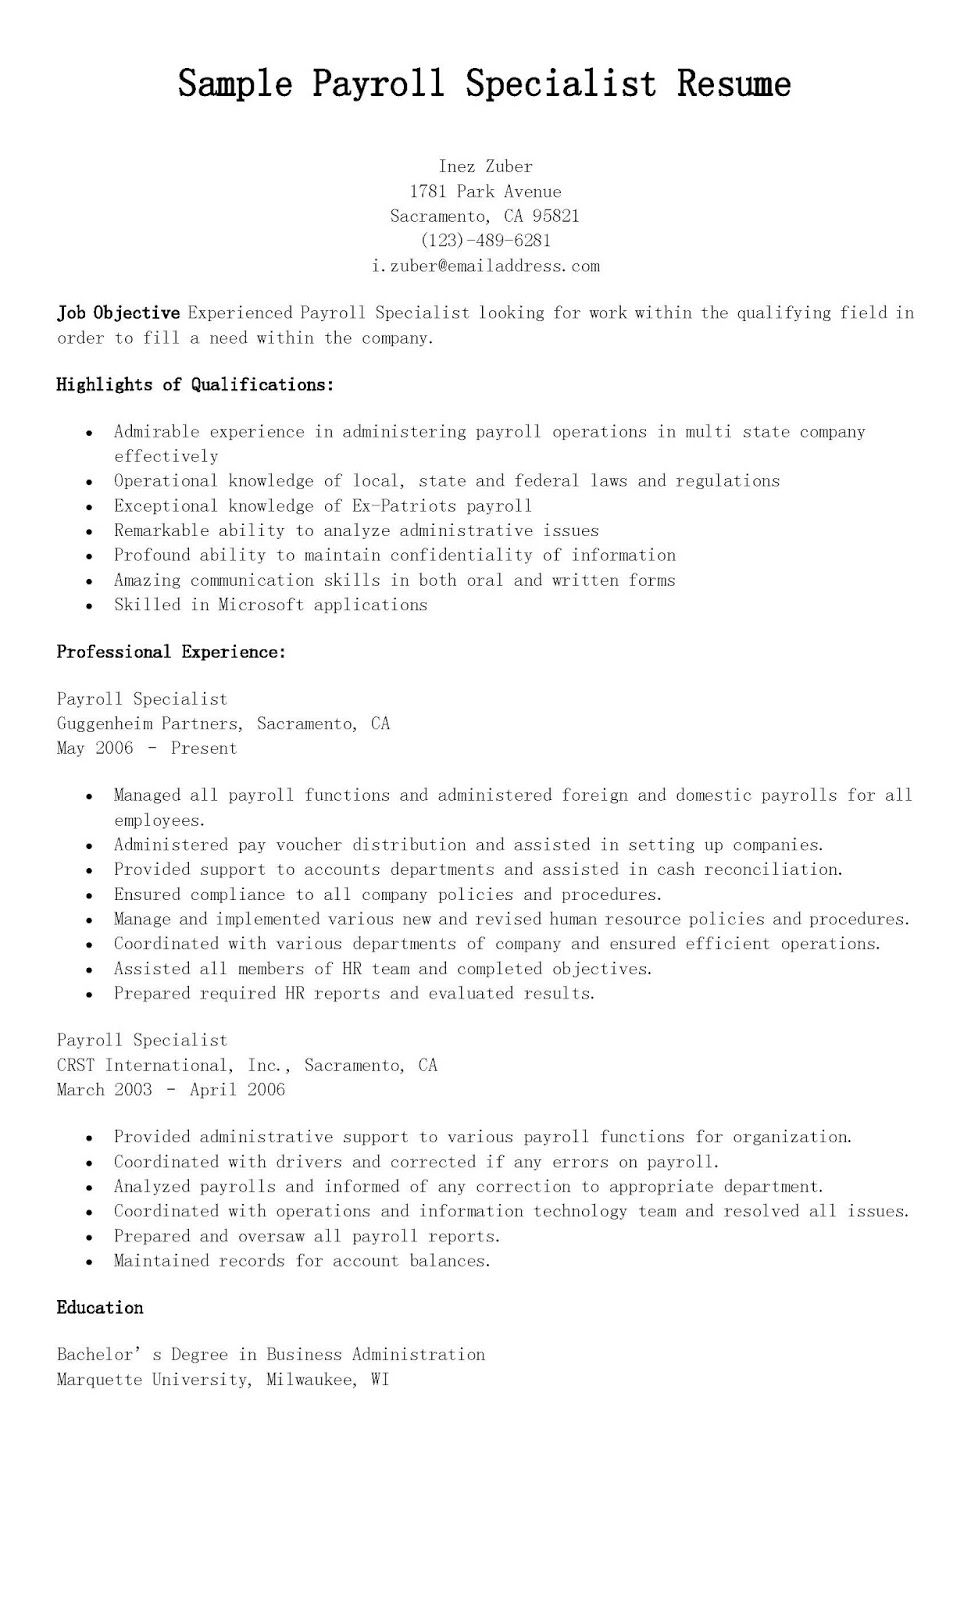 Sample Payroll Specialist Resume Resume Payroll Patient Care regarding dimensions 971 X 1600